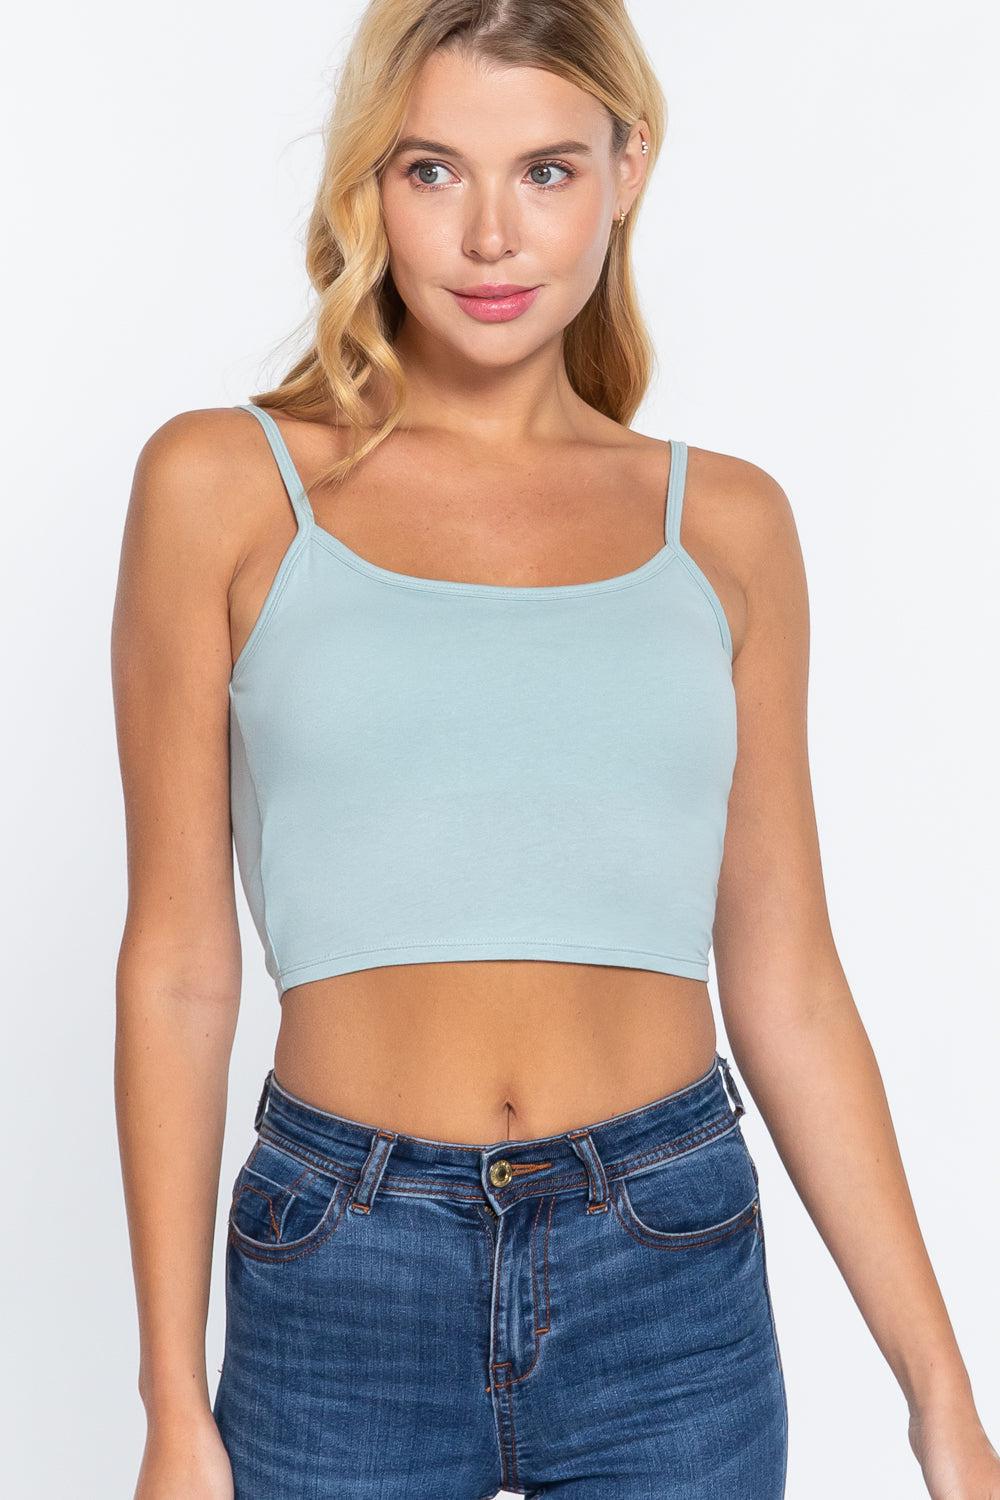 Round Neck with removable Bra Cup Cotton Spandex Bra Top Blue Zone Planet